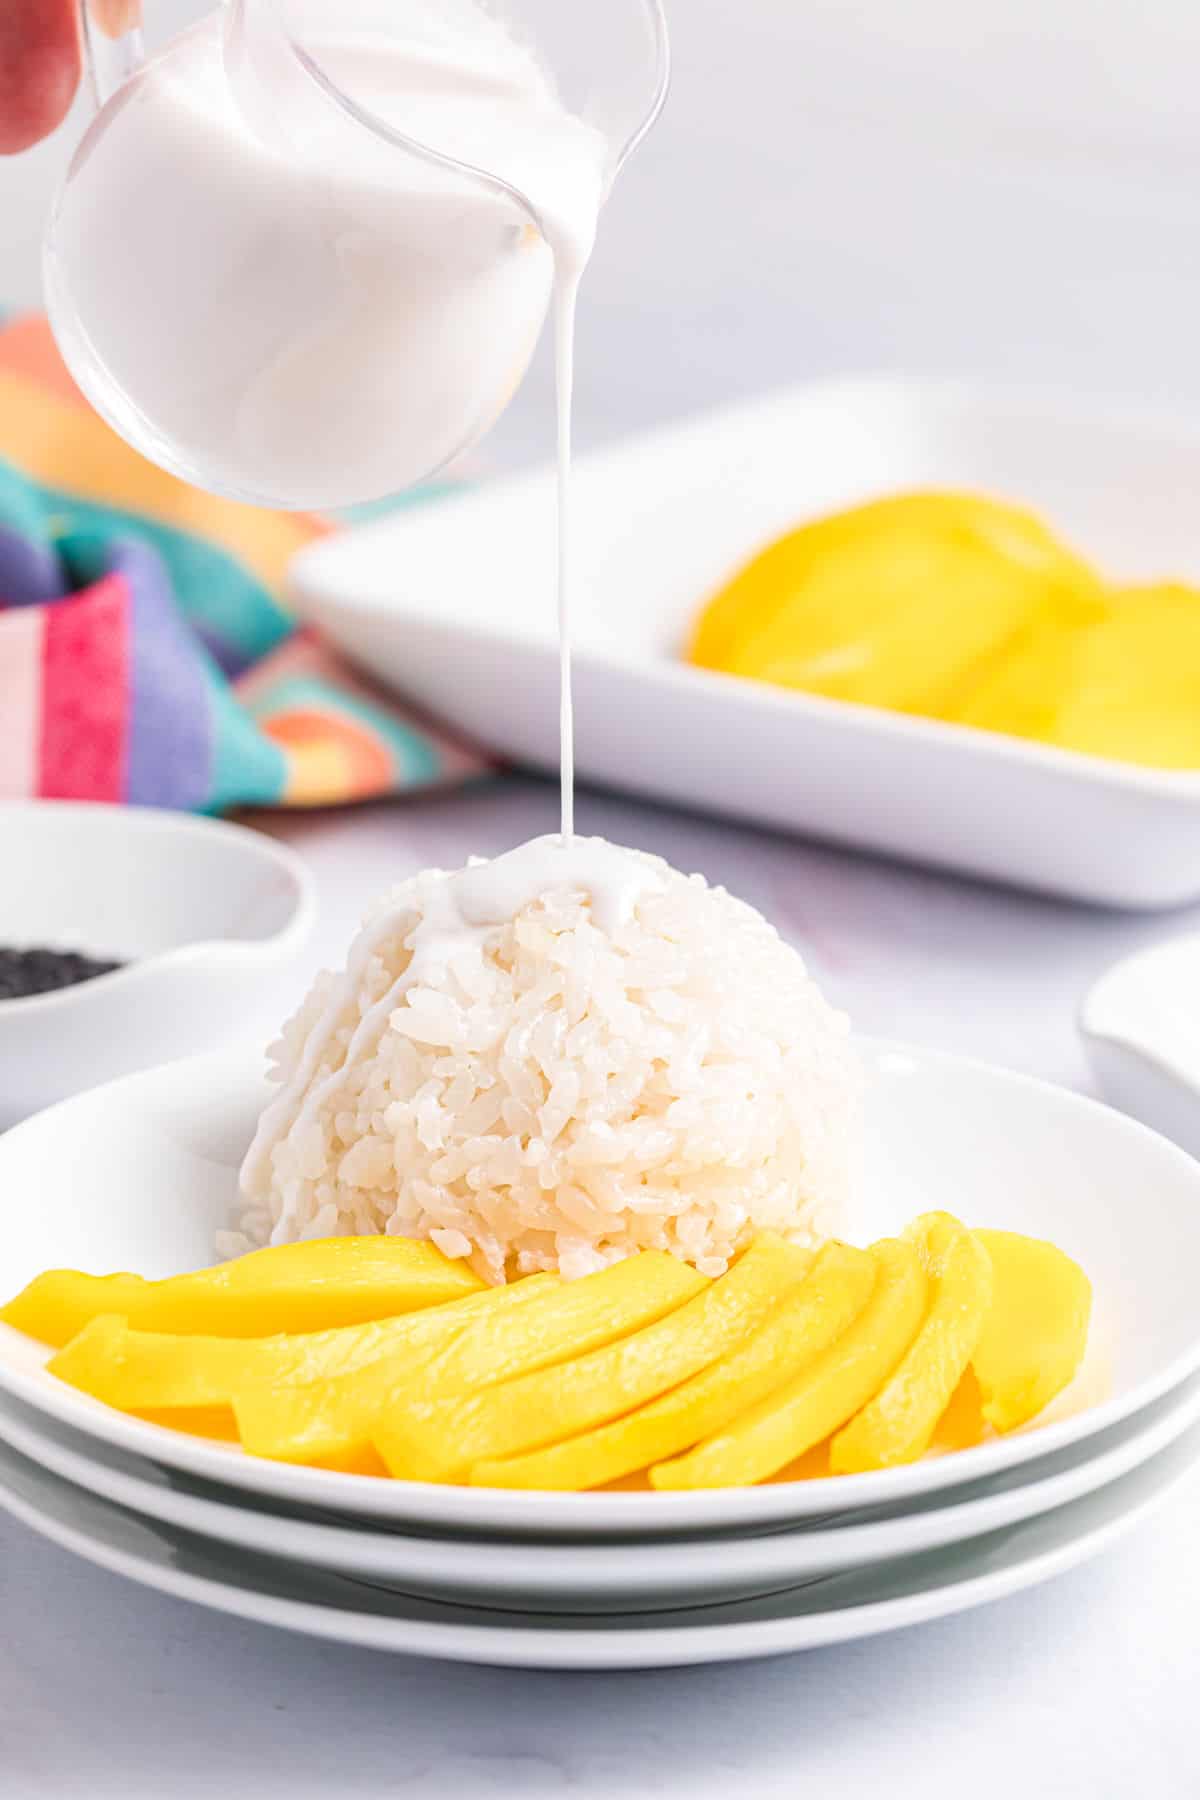 Coconut milk is being drizzled onto a serving of mango sticky rice.